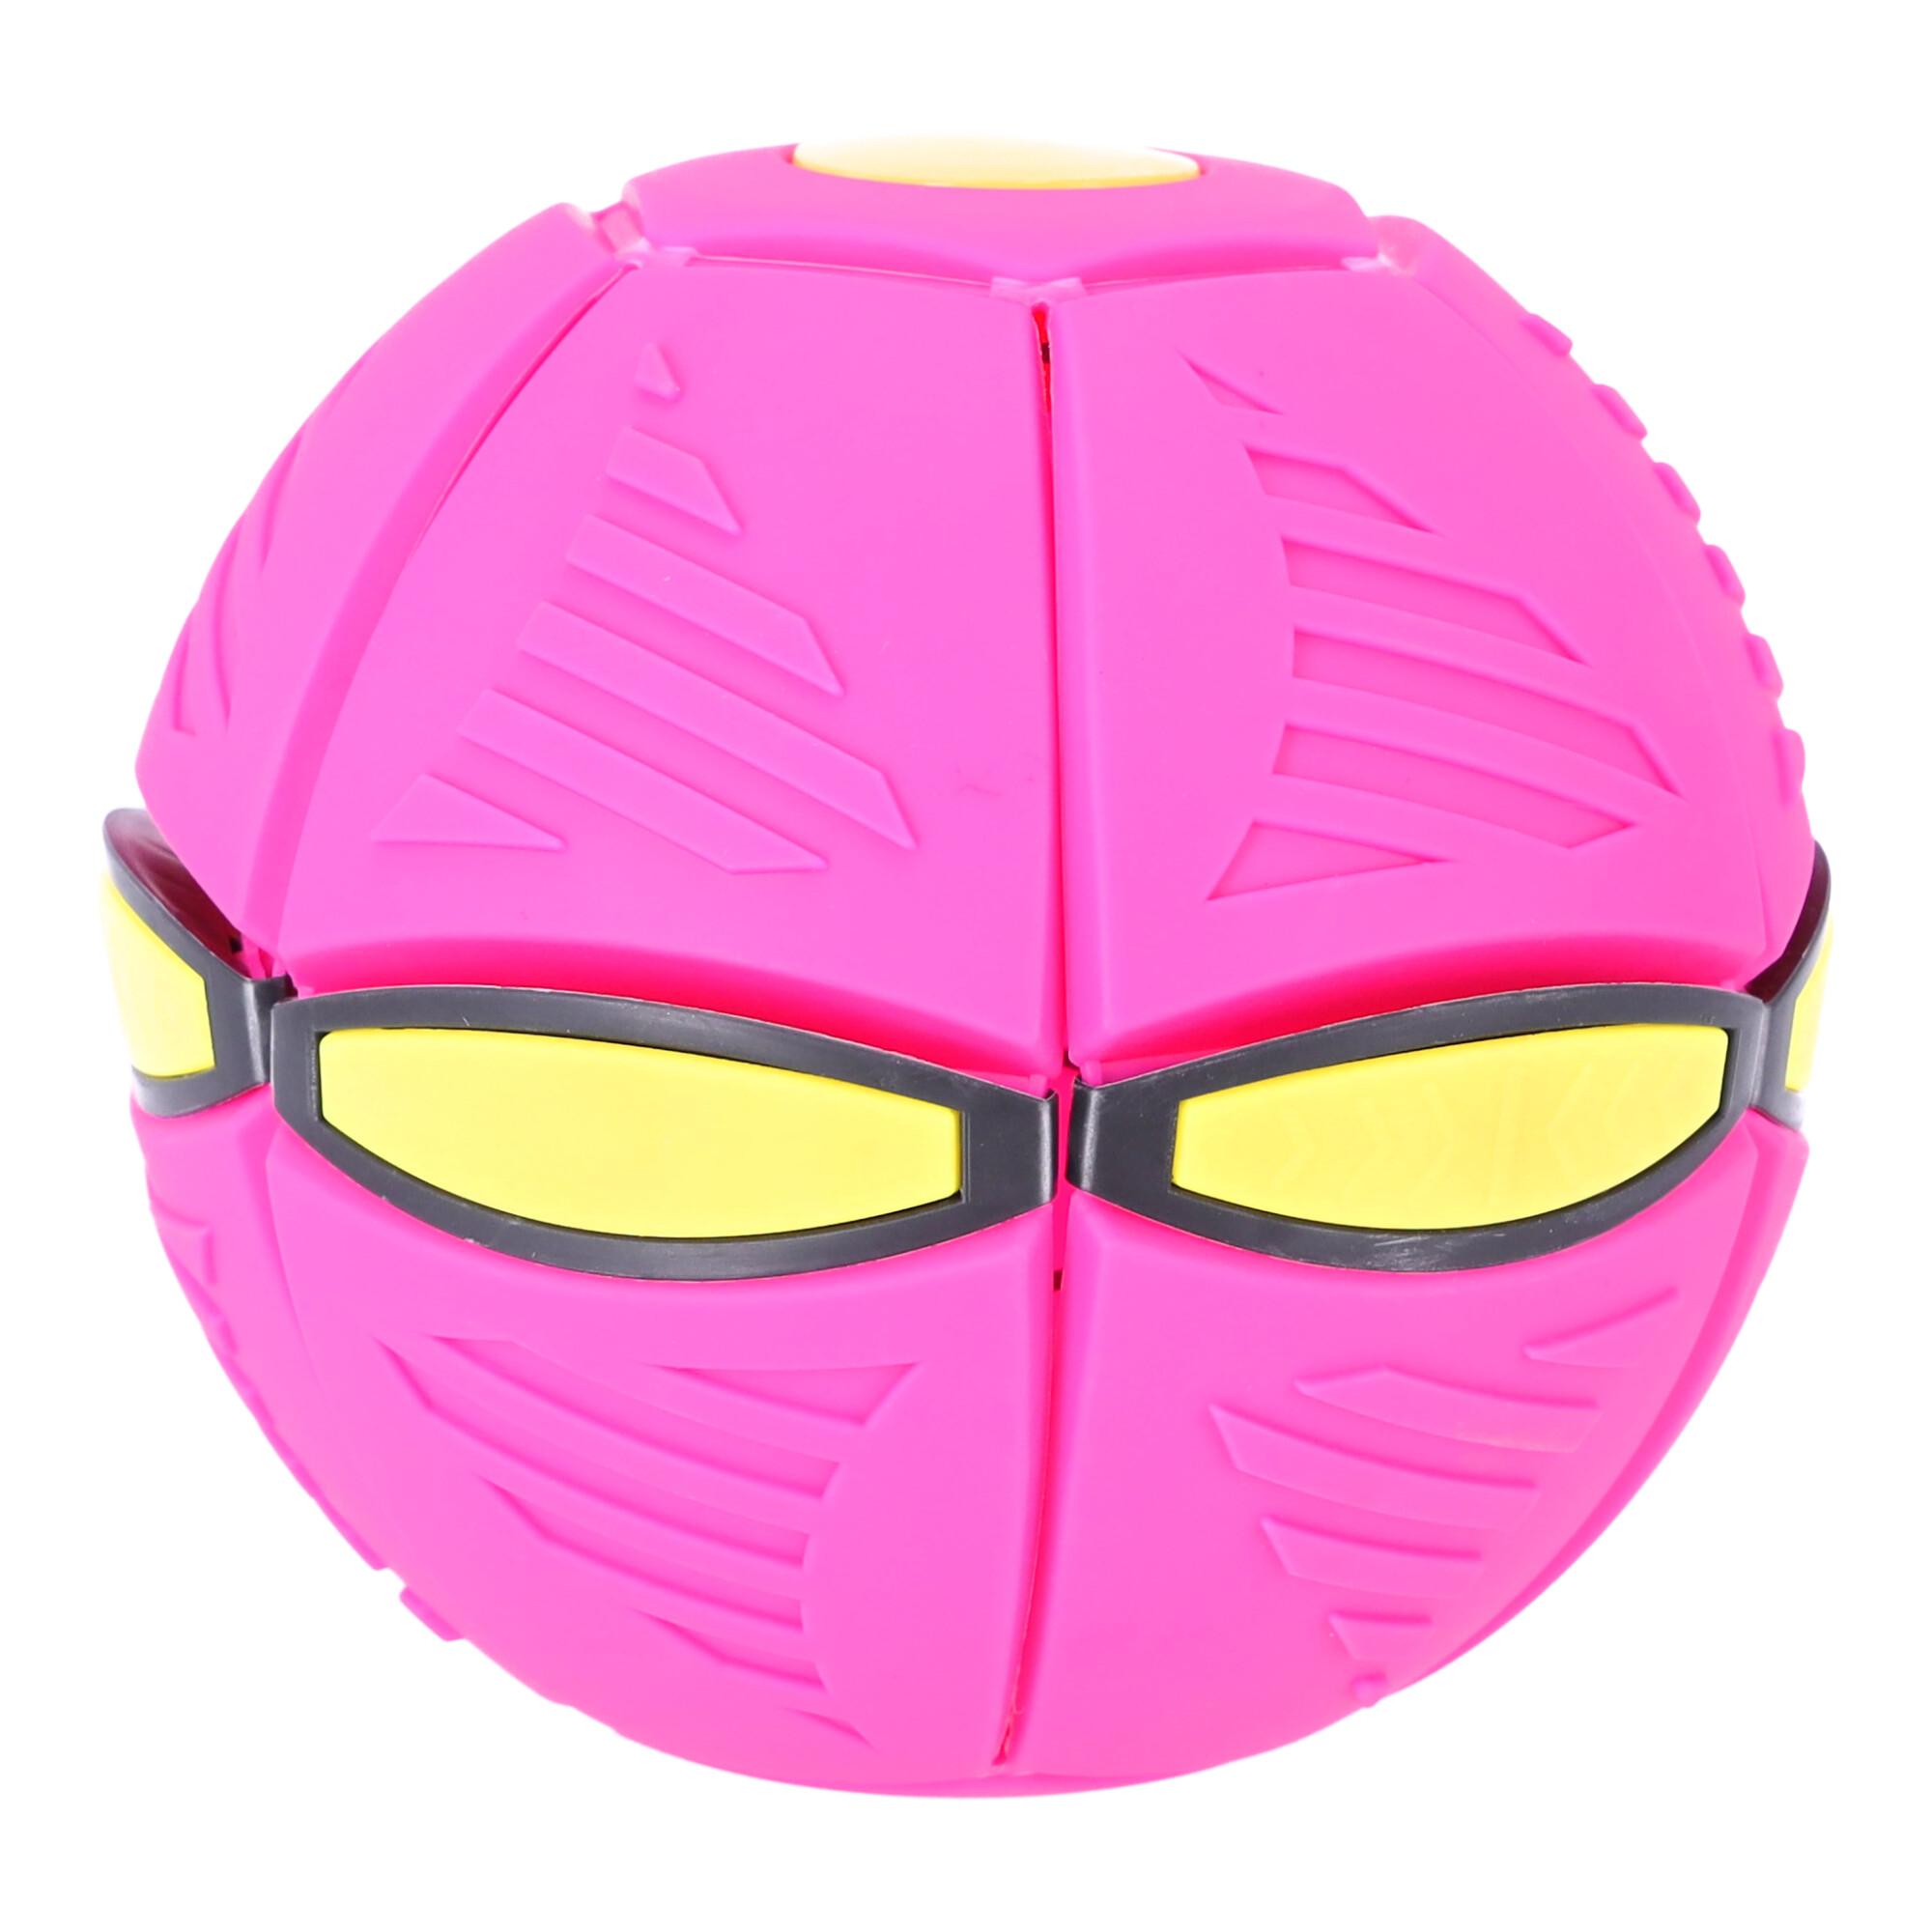 Flying ball 2-in-1, disc-ball - pink